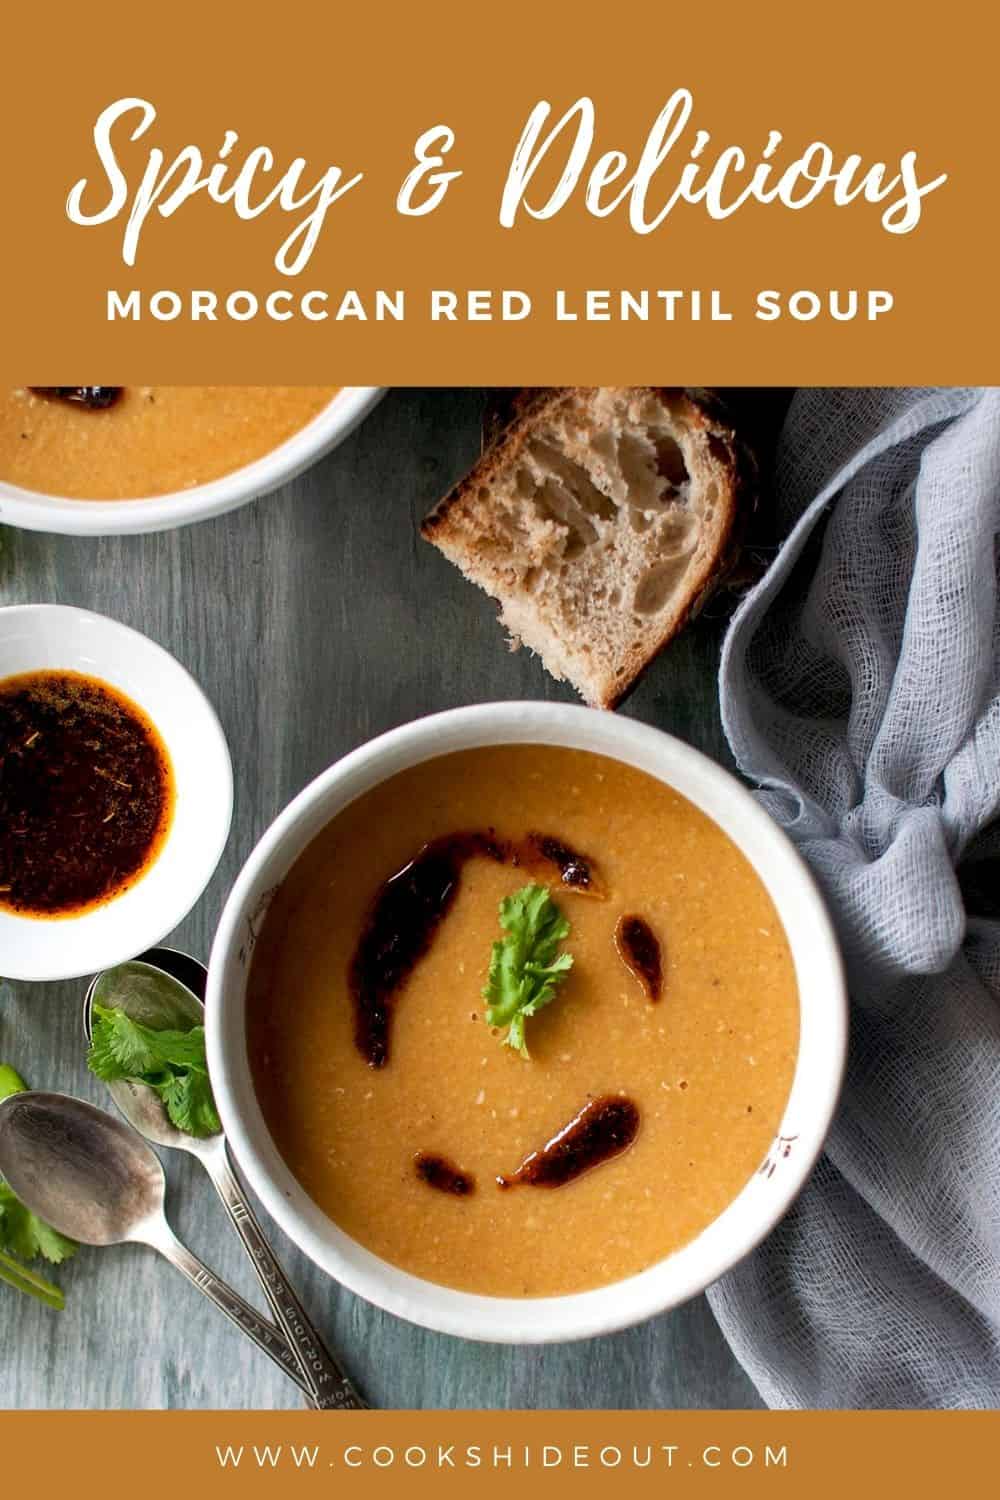 White bowl with Moroccan red lentil soup